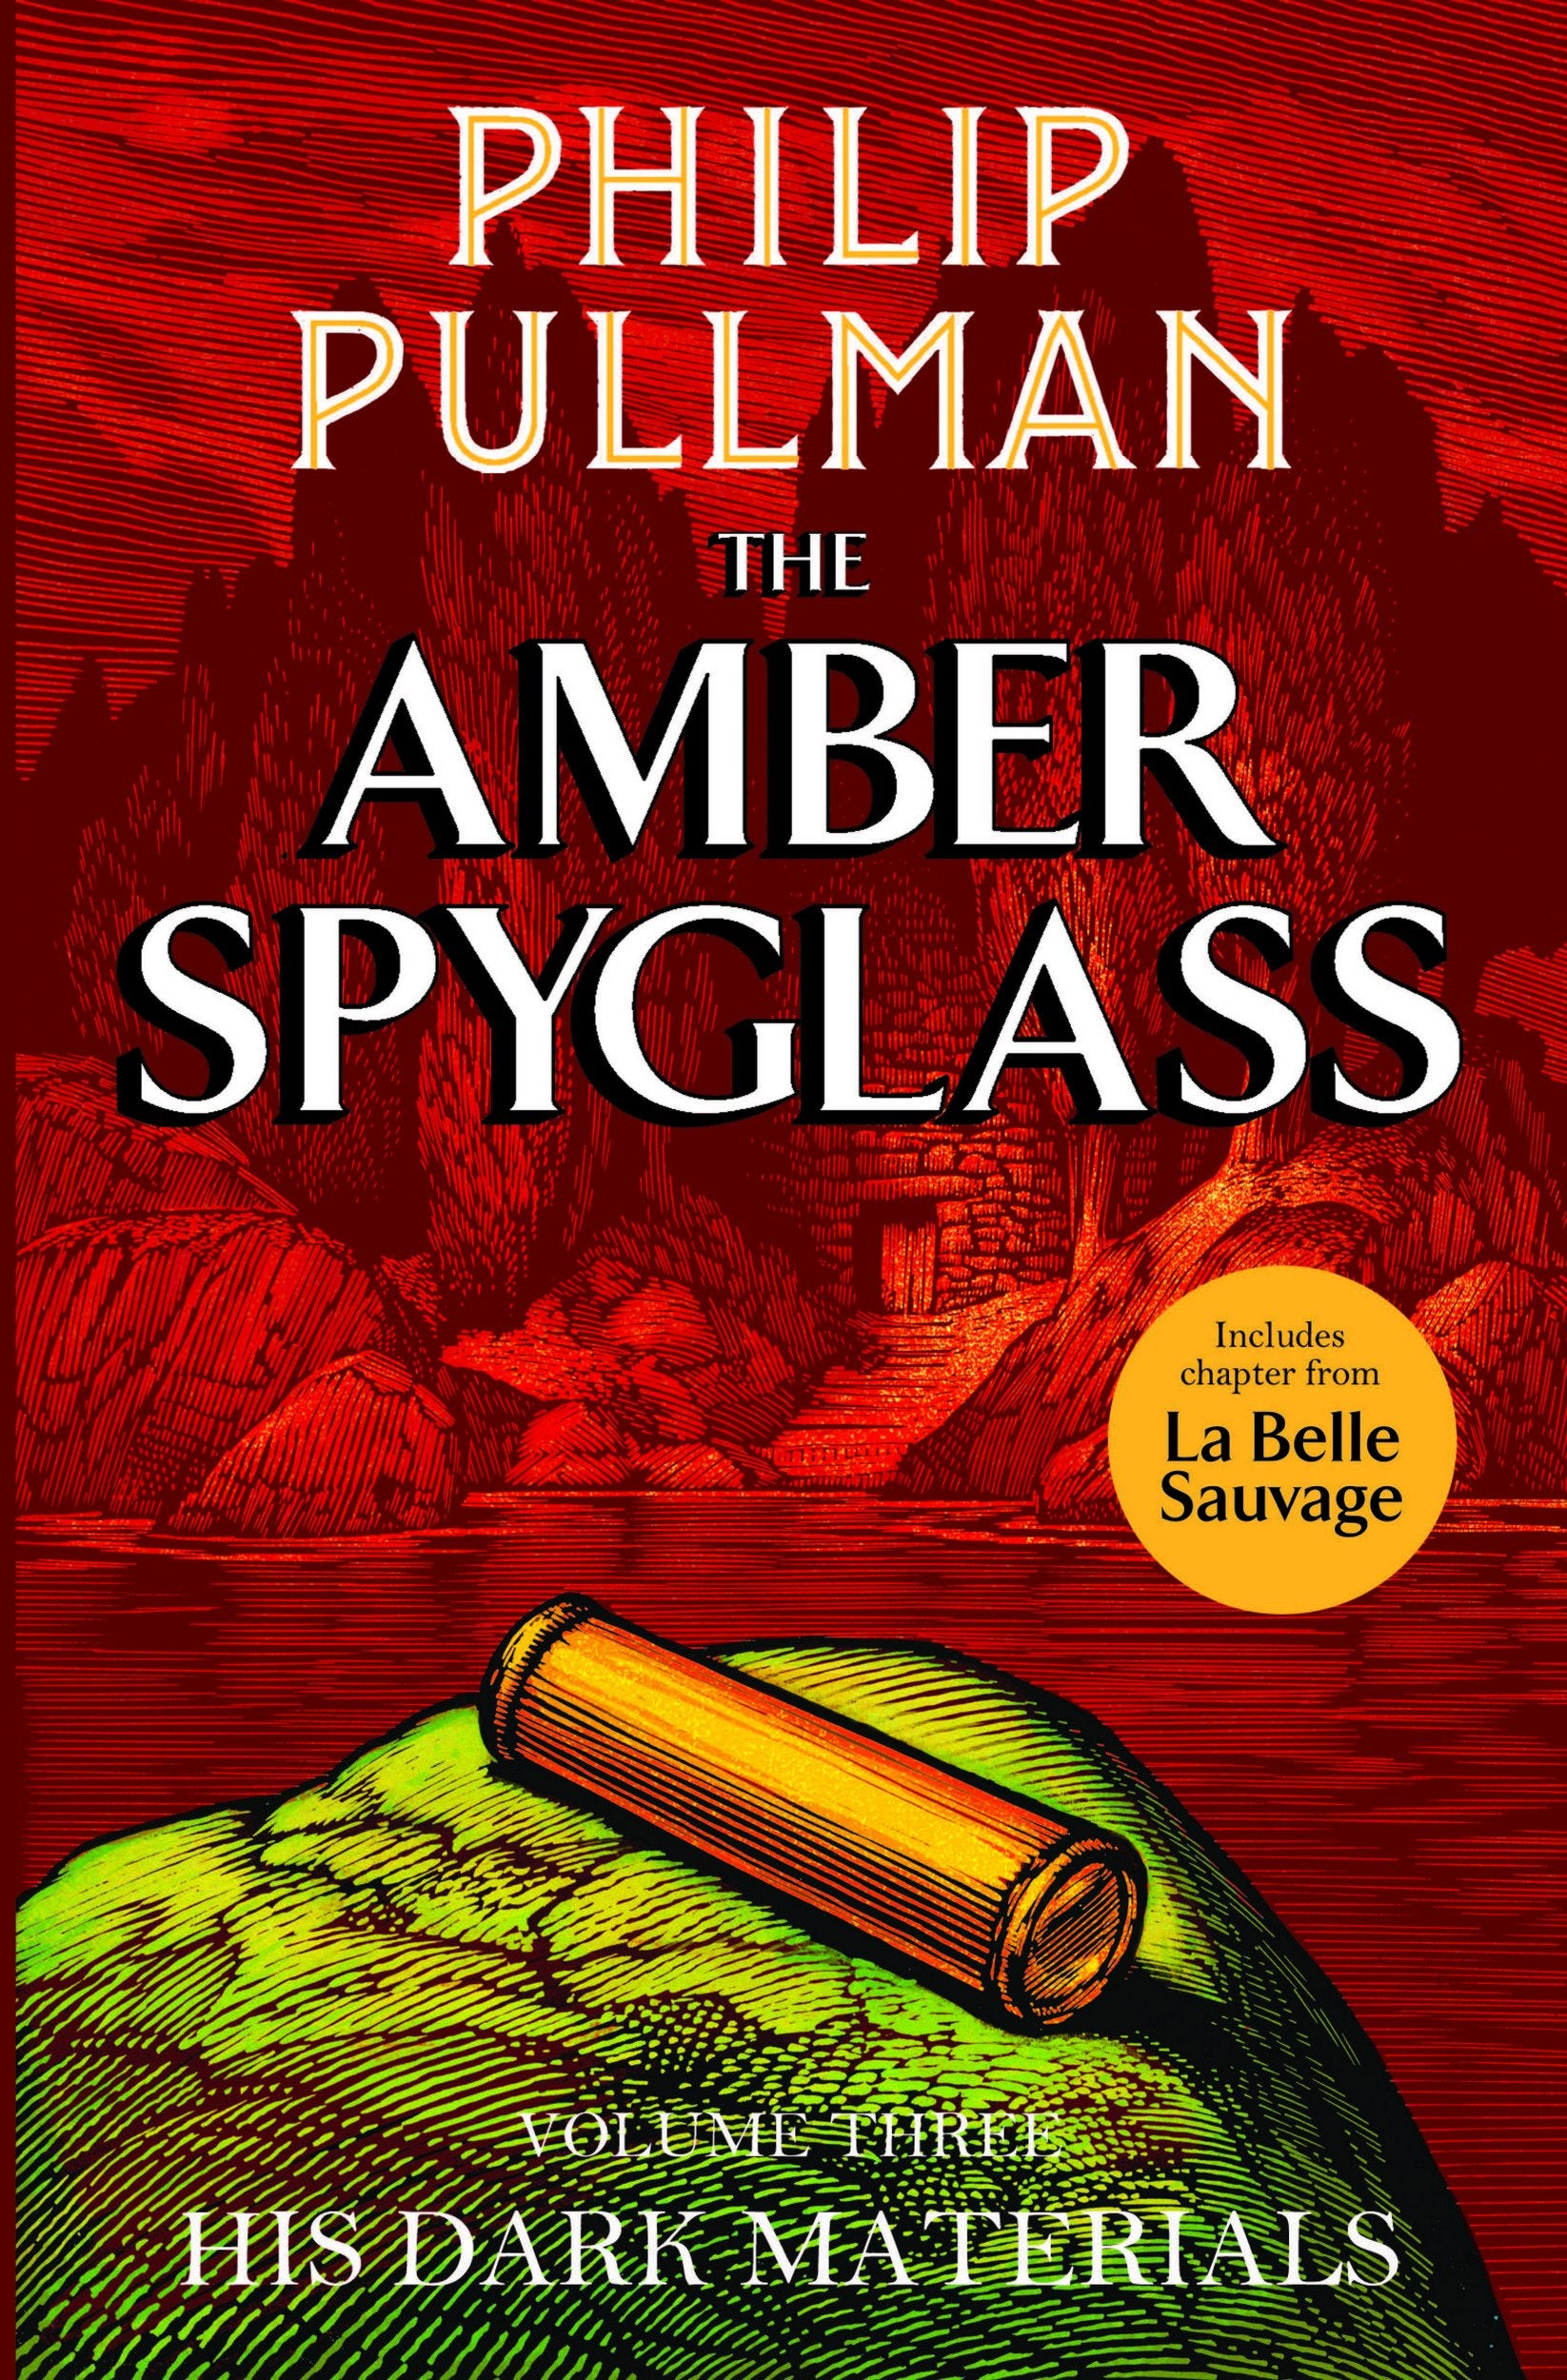 His Dark Materials: The Amber Spyglass by Philip Pullman (Paperback)